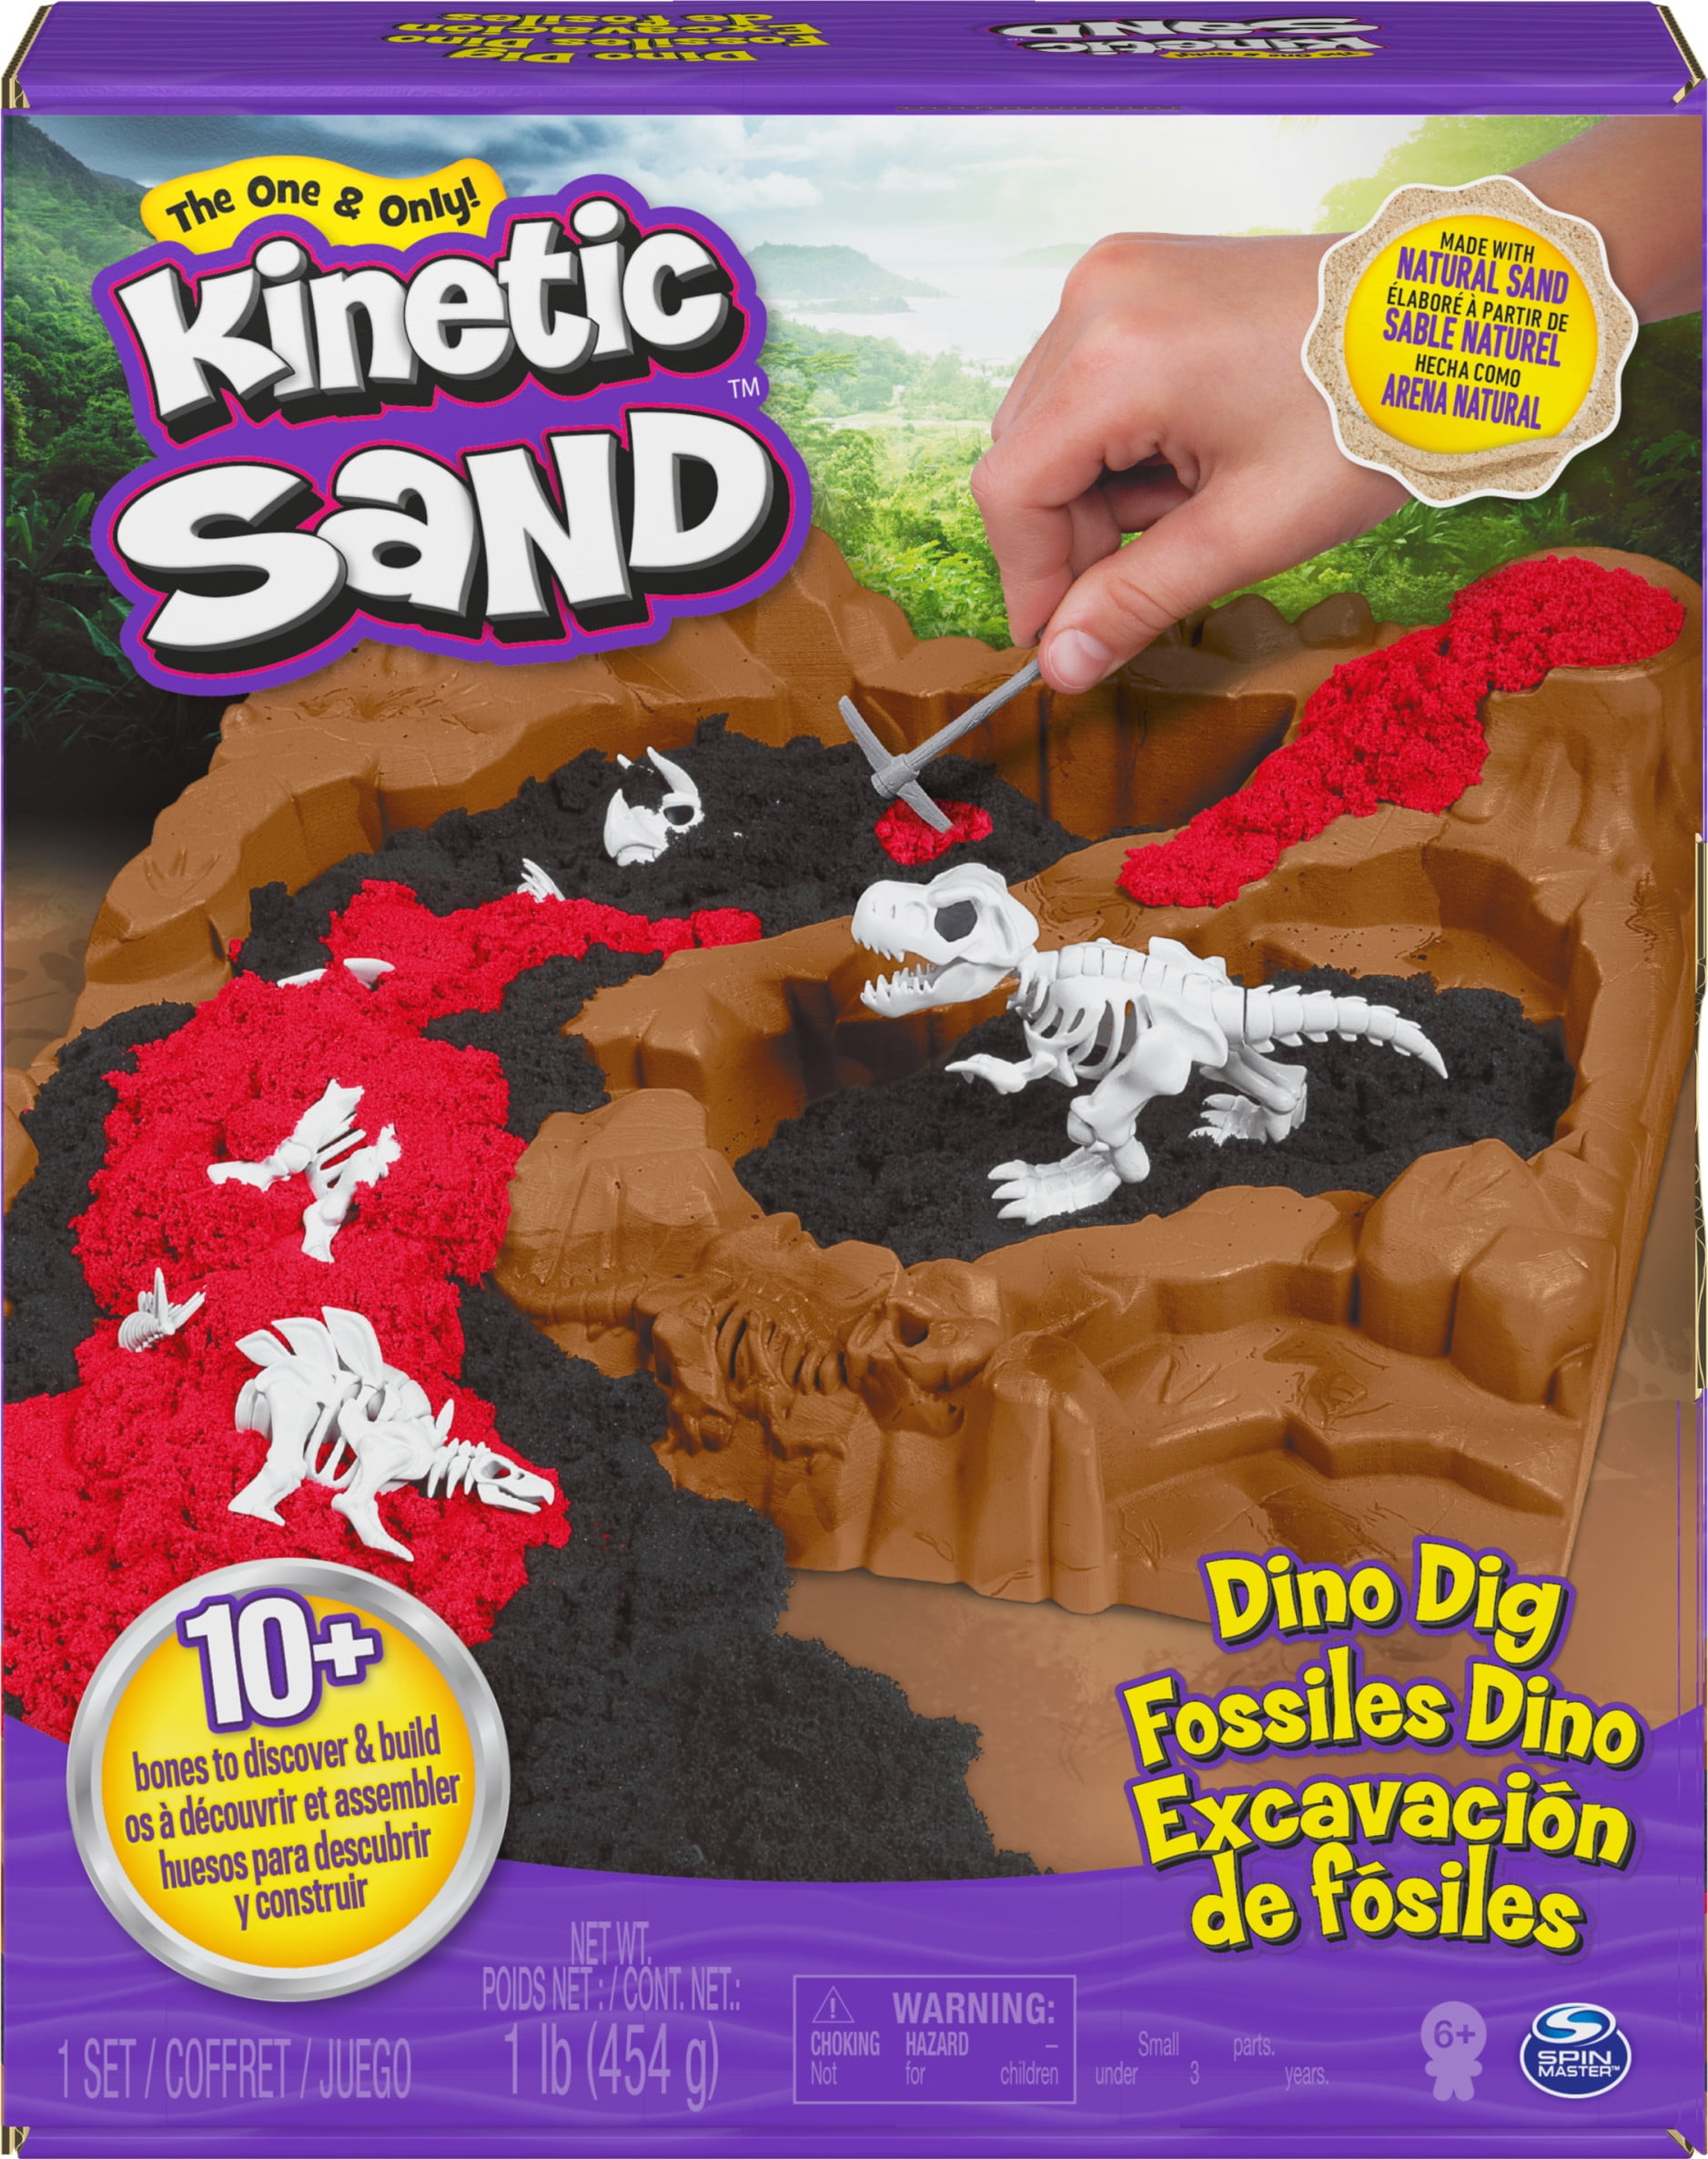 Playing with Kinetic Sand and Dinosaurs and Plastic Eggs